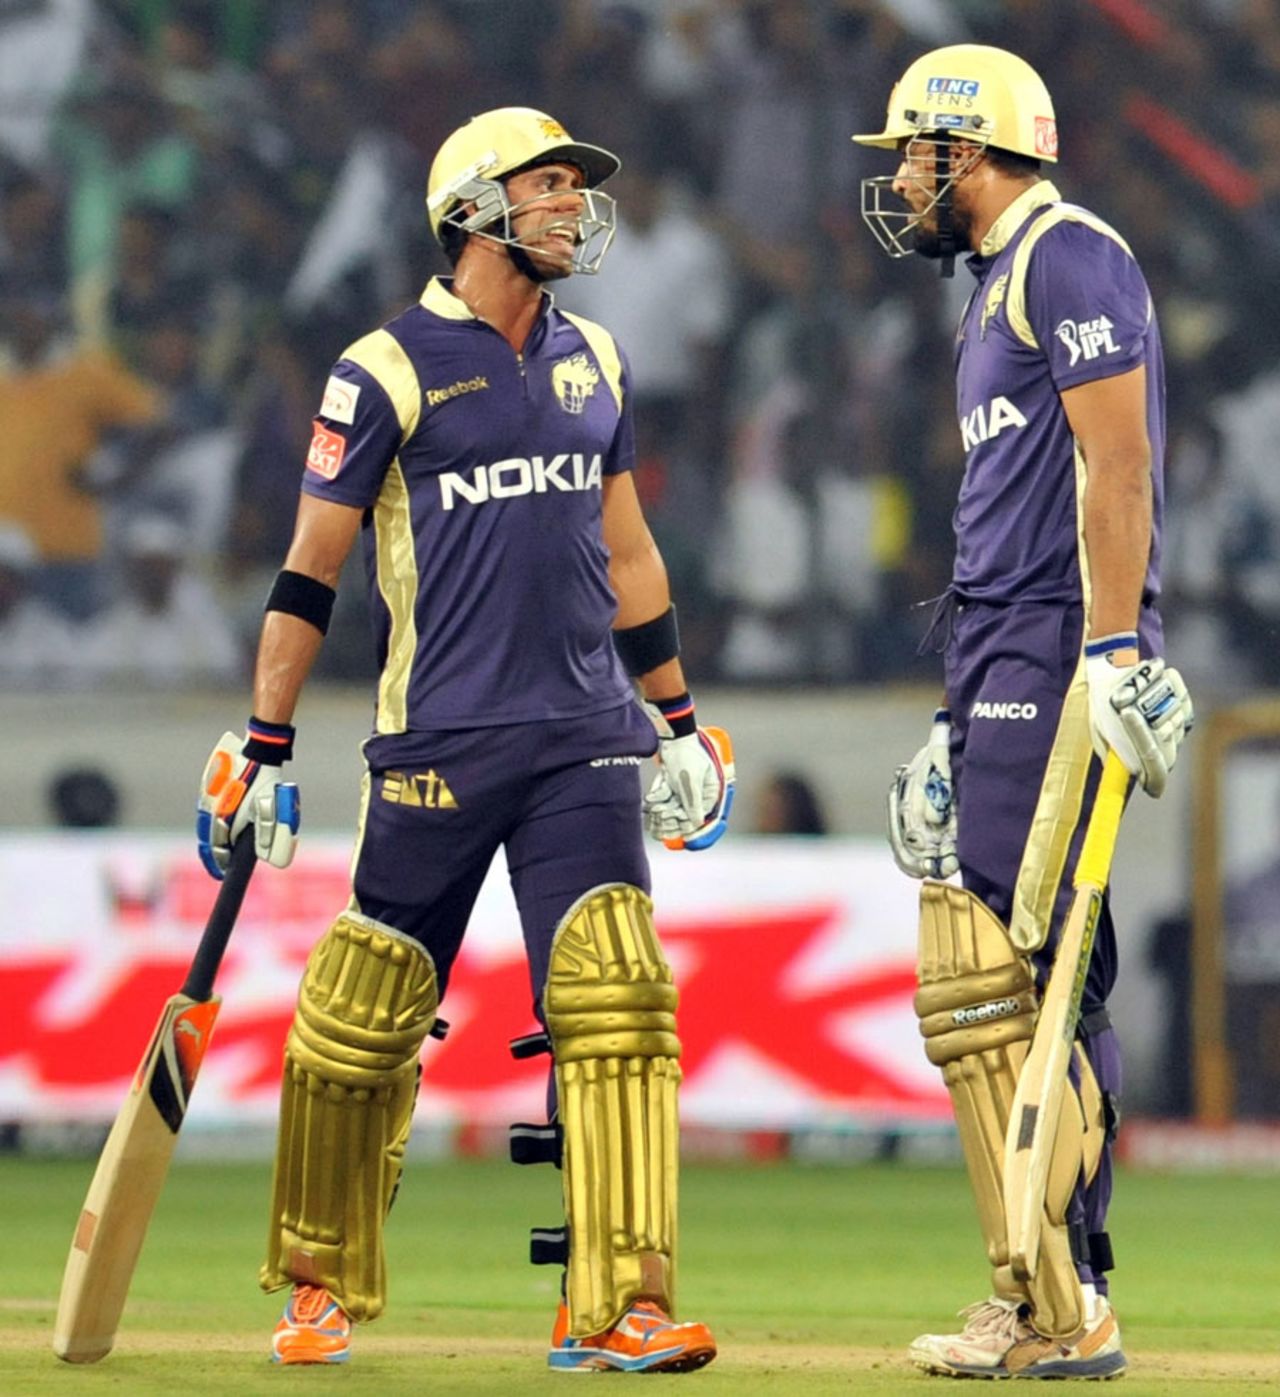 Manoj Tiwary and Yusuf Pathan added 80 in eight overs, Deccan Chargers v Kolkata Knight Riders, IPL 2011, Hyderabad, May 3, 2011